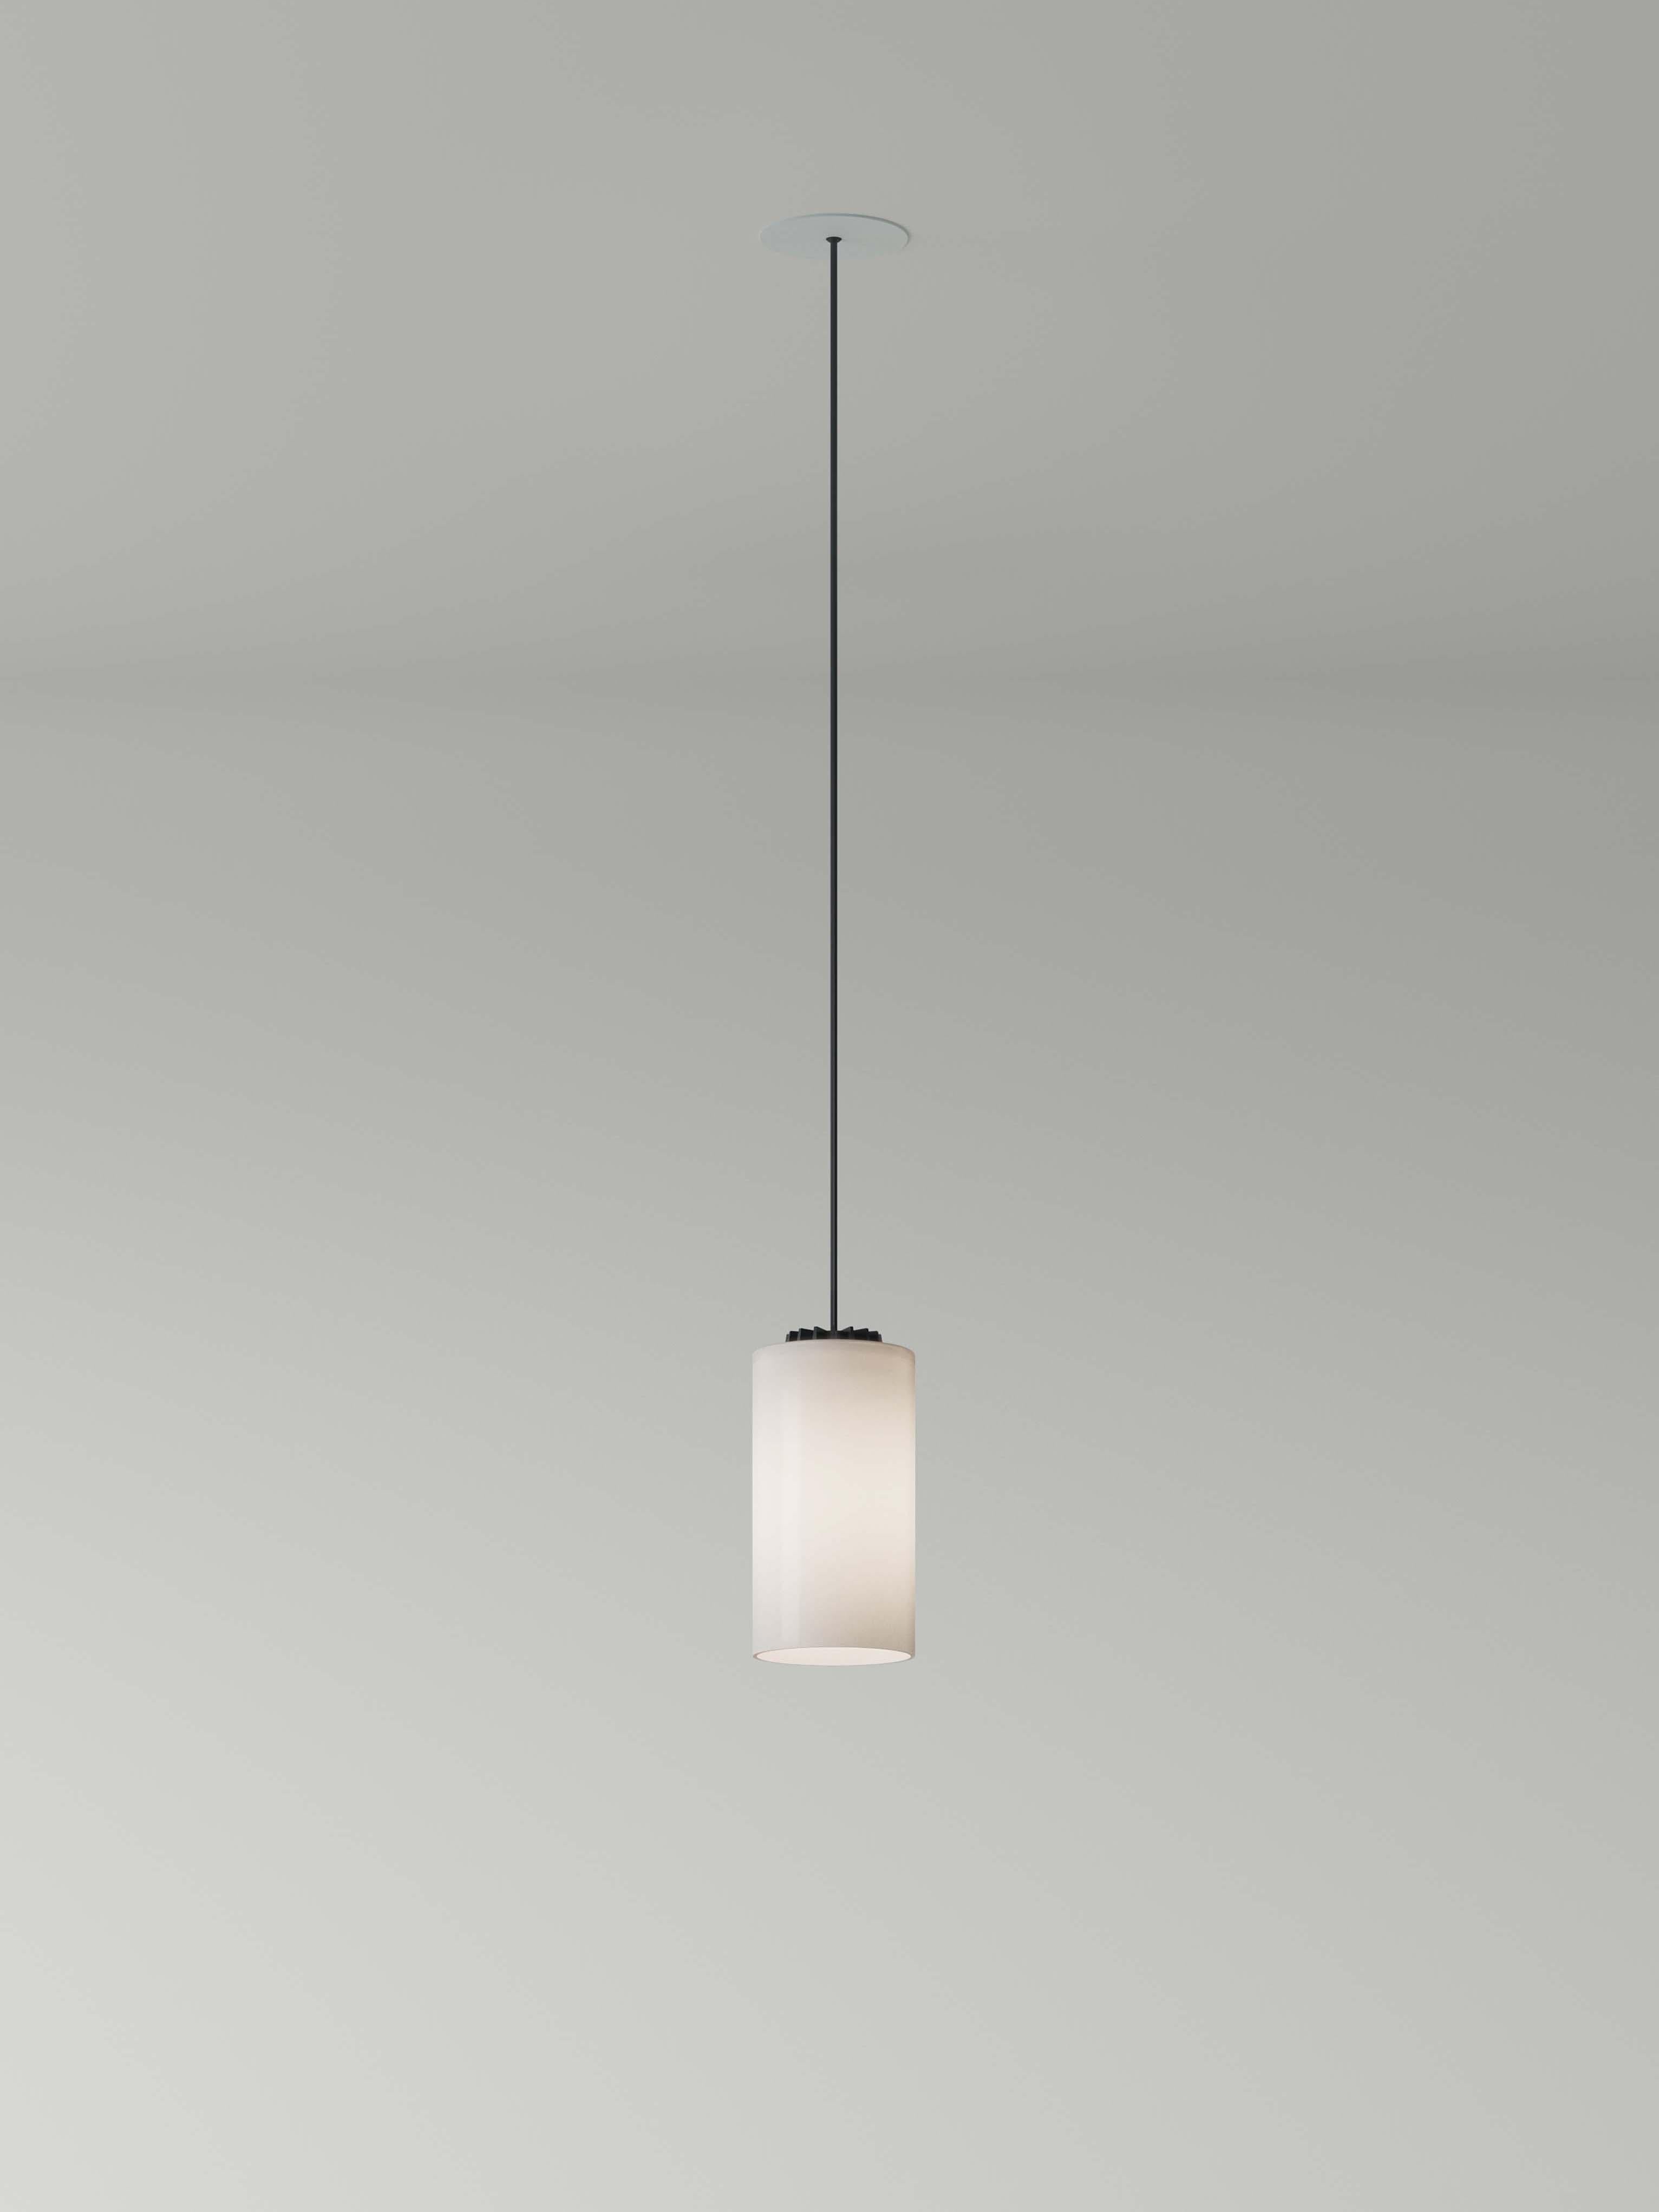 Glass Cirio simple pendant lamp by Antoni Arola
Dimensions: D 11 x H 325 cm
Materials: Glass.
Available in 3 lampshade materials: white porcelain, white opal glass and polished brass.
Available in 2 cable lengths: 3mts, 8mts.
Availalble in 2